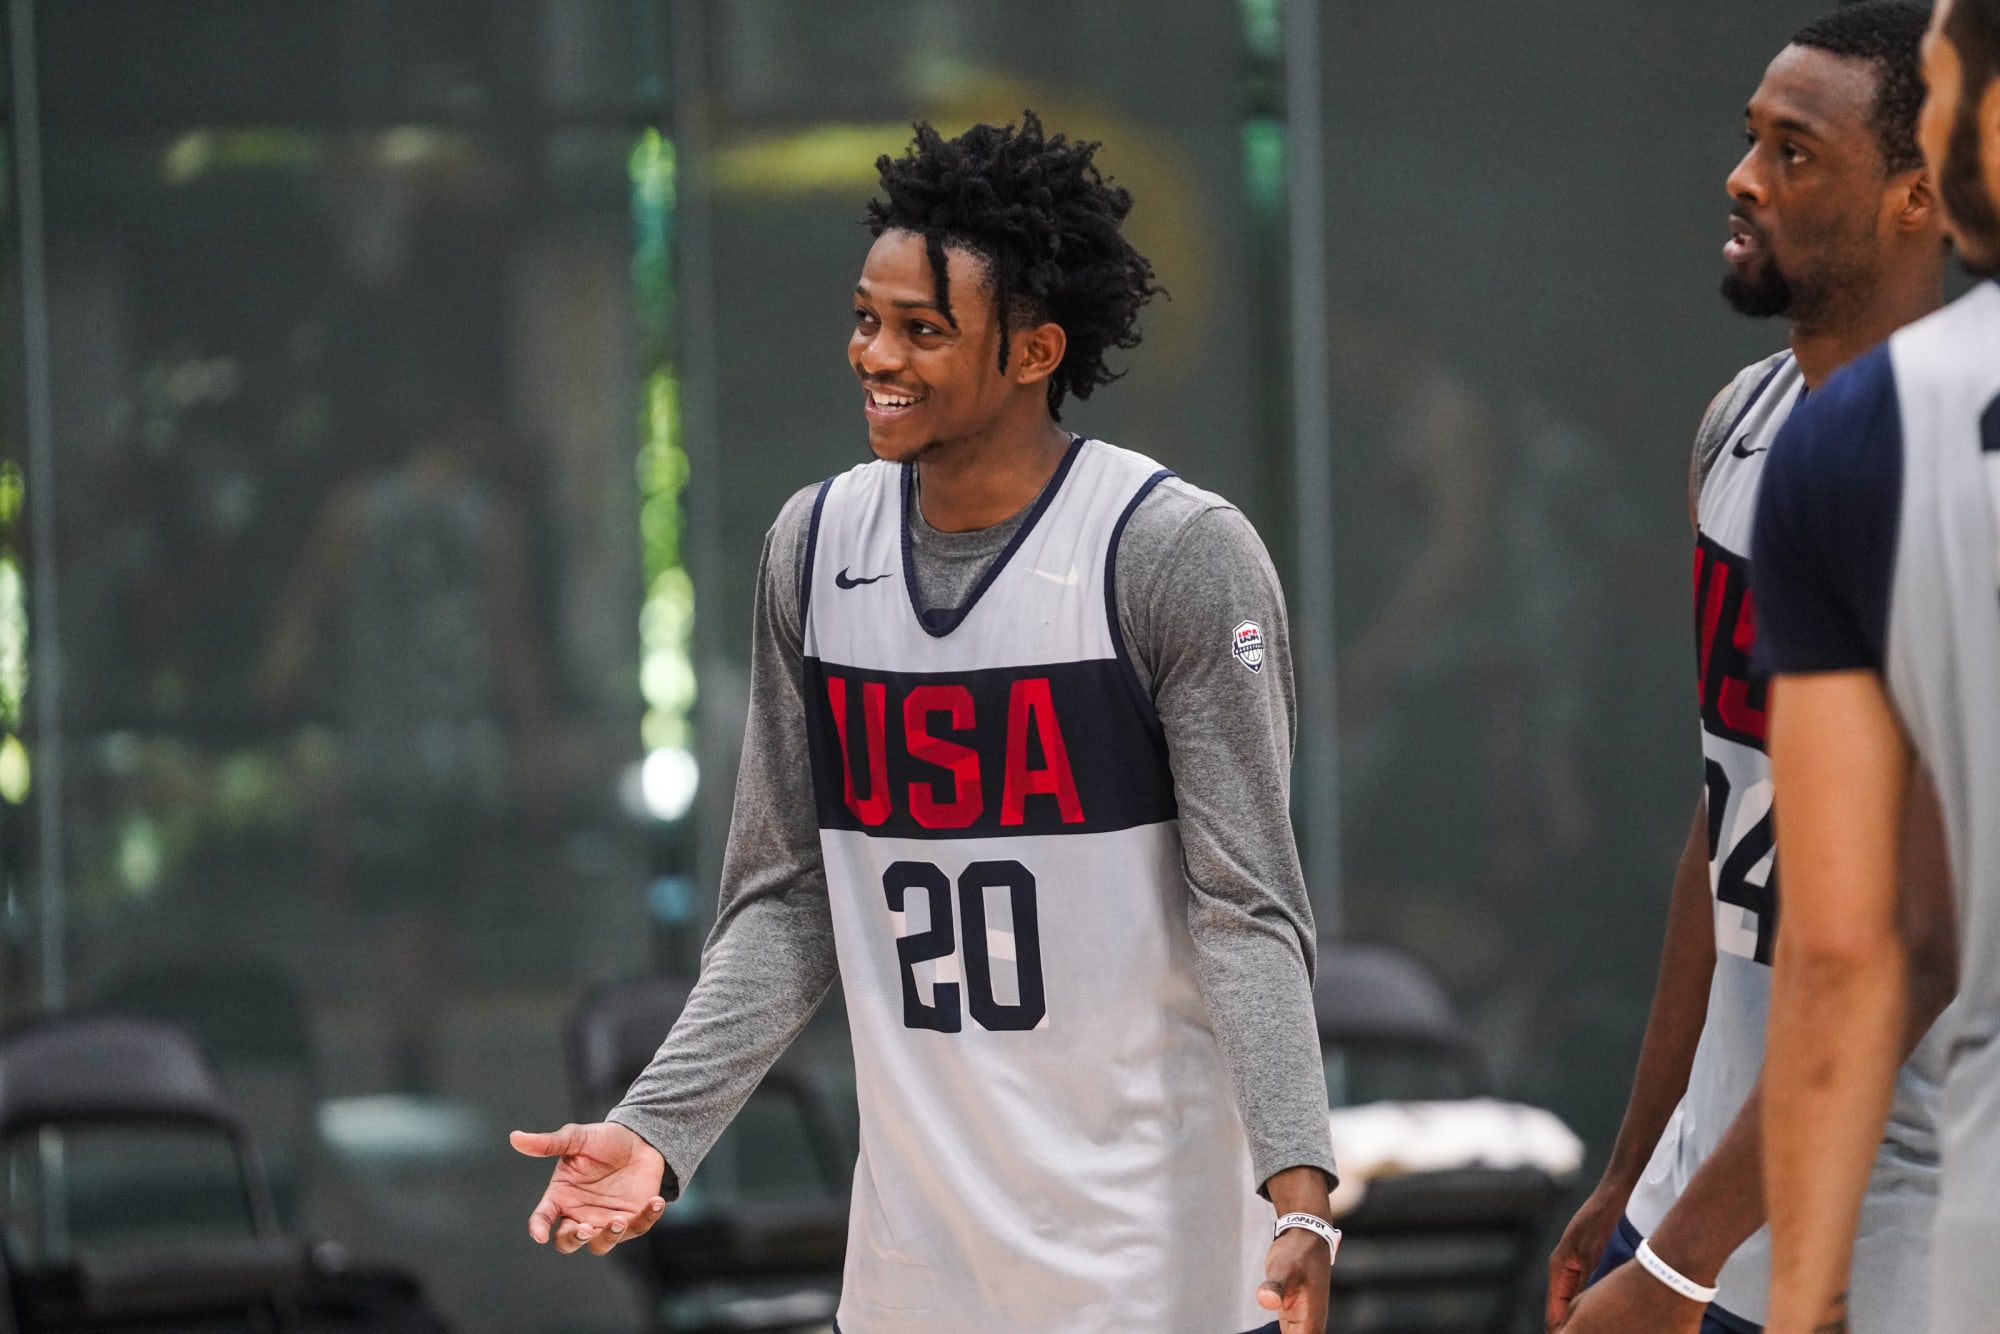 De'Aaron Fox Is Most Improved Player And It's Not Close